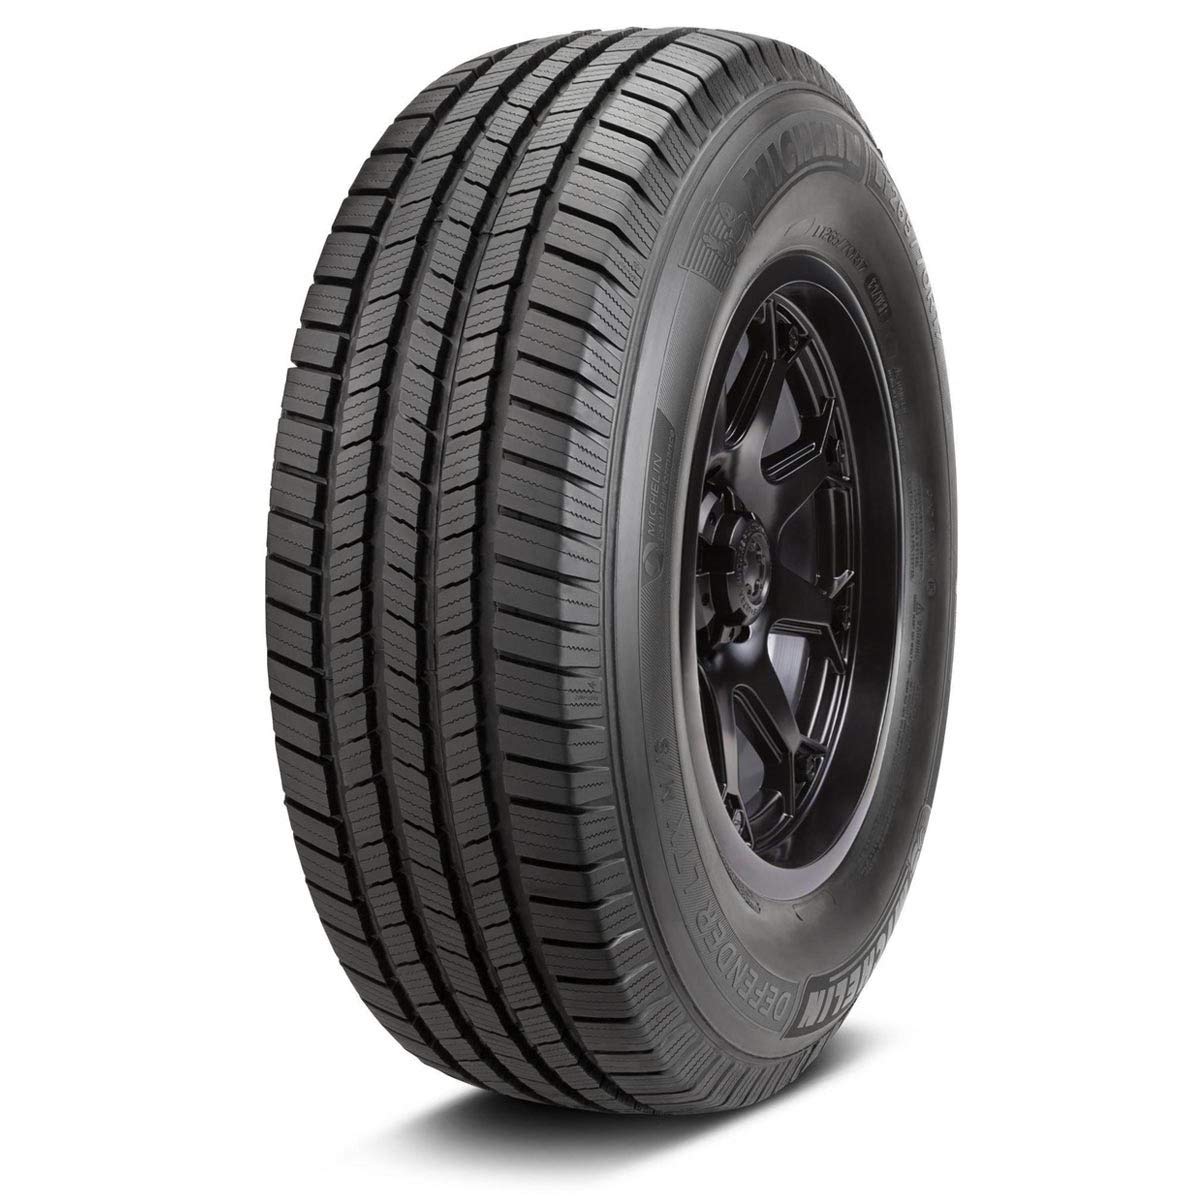 Michelin Defender LTX M S Review Truck Tire Reviews